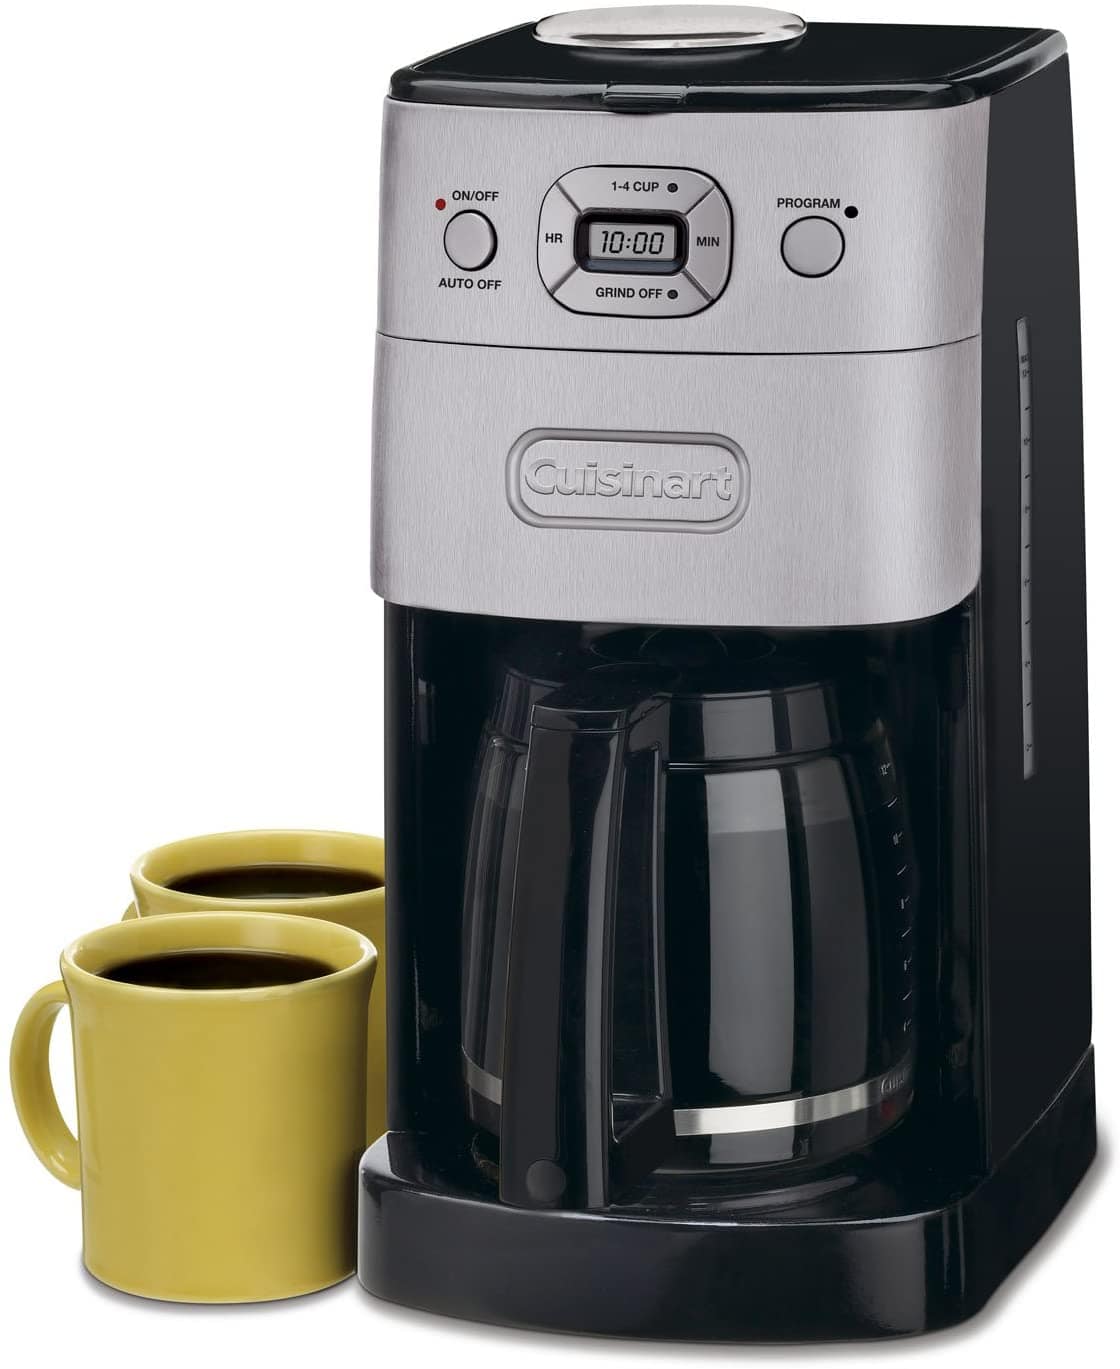 5 Best Coffee Makers under $200 (March 2021) - Top Picks & Reviews